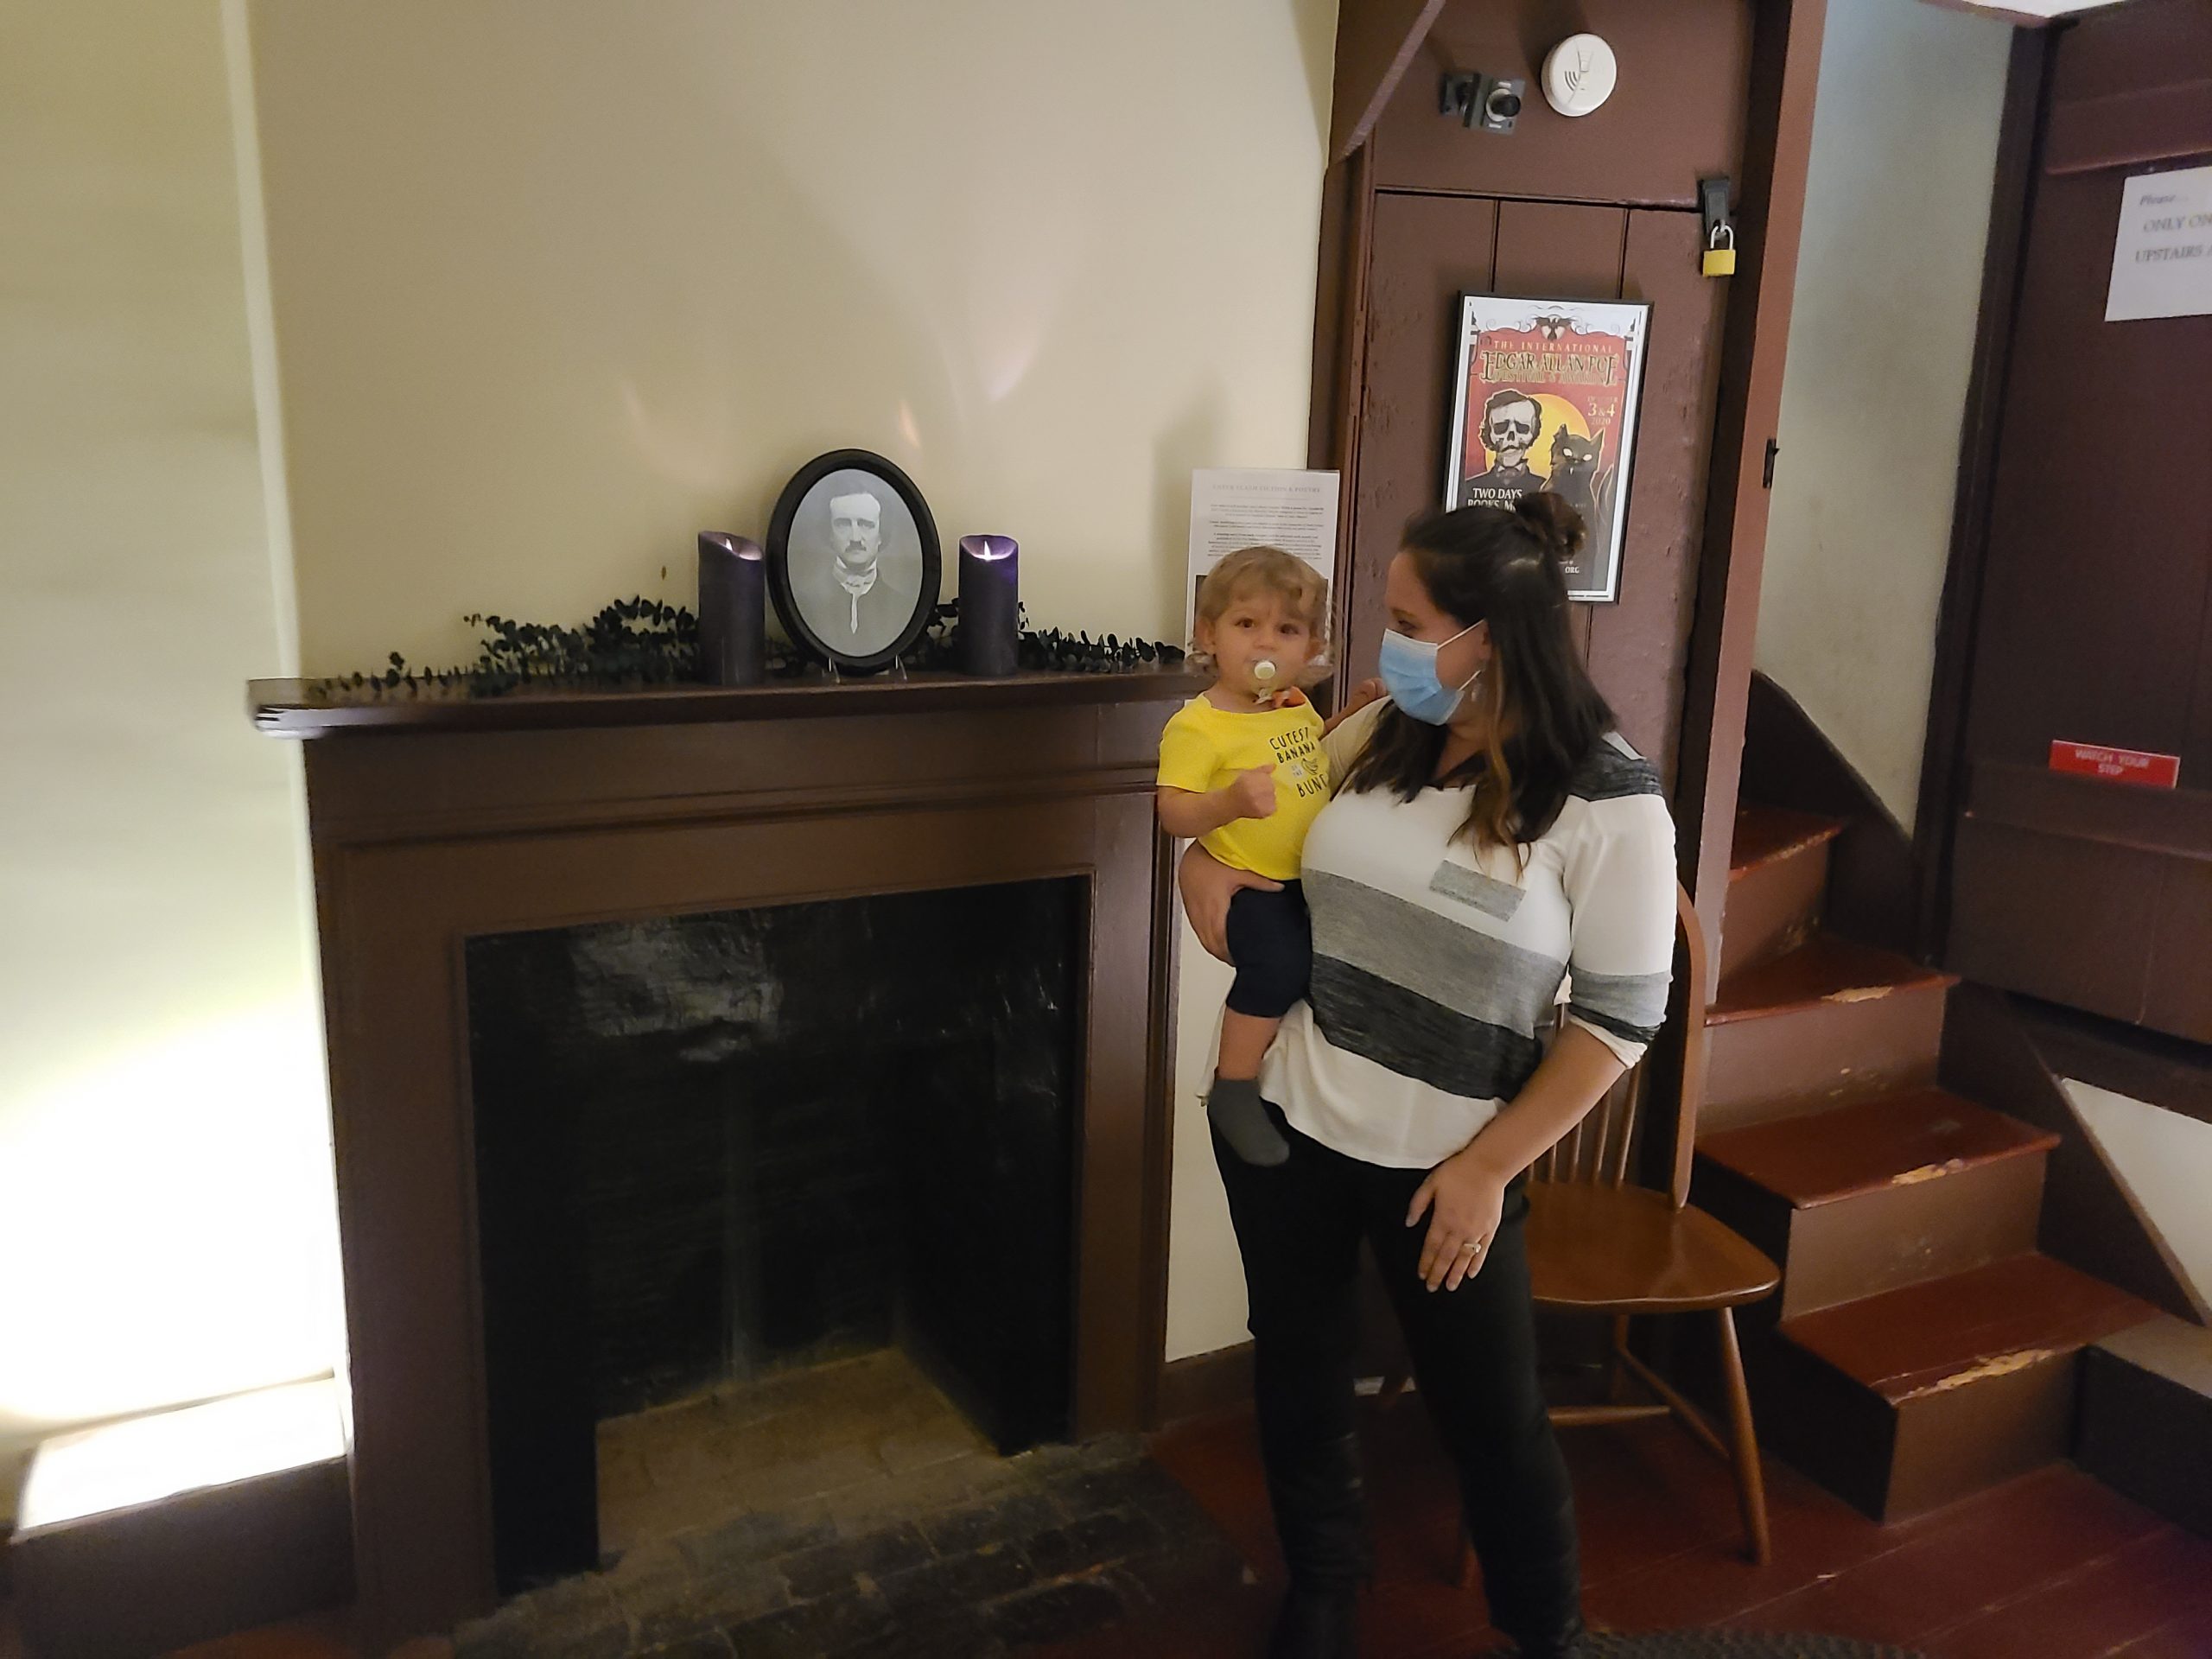 A woman and child standing in the Edgar Allan Poe house